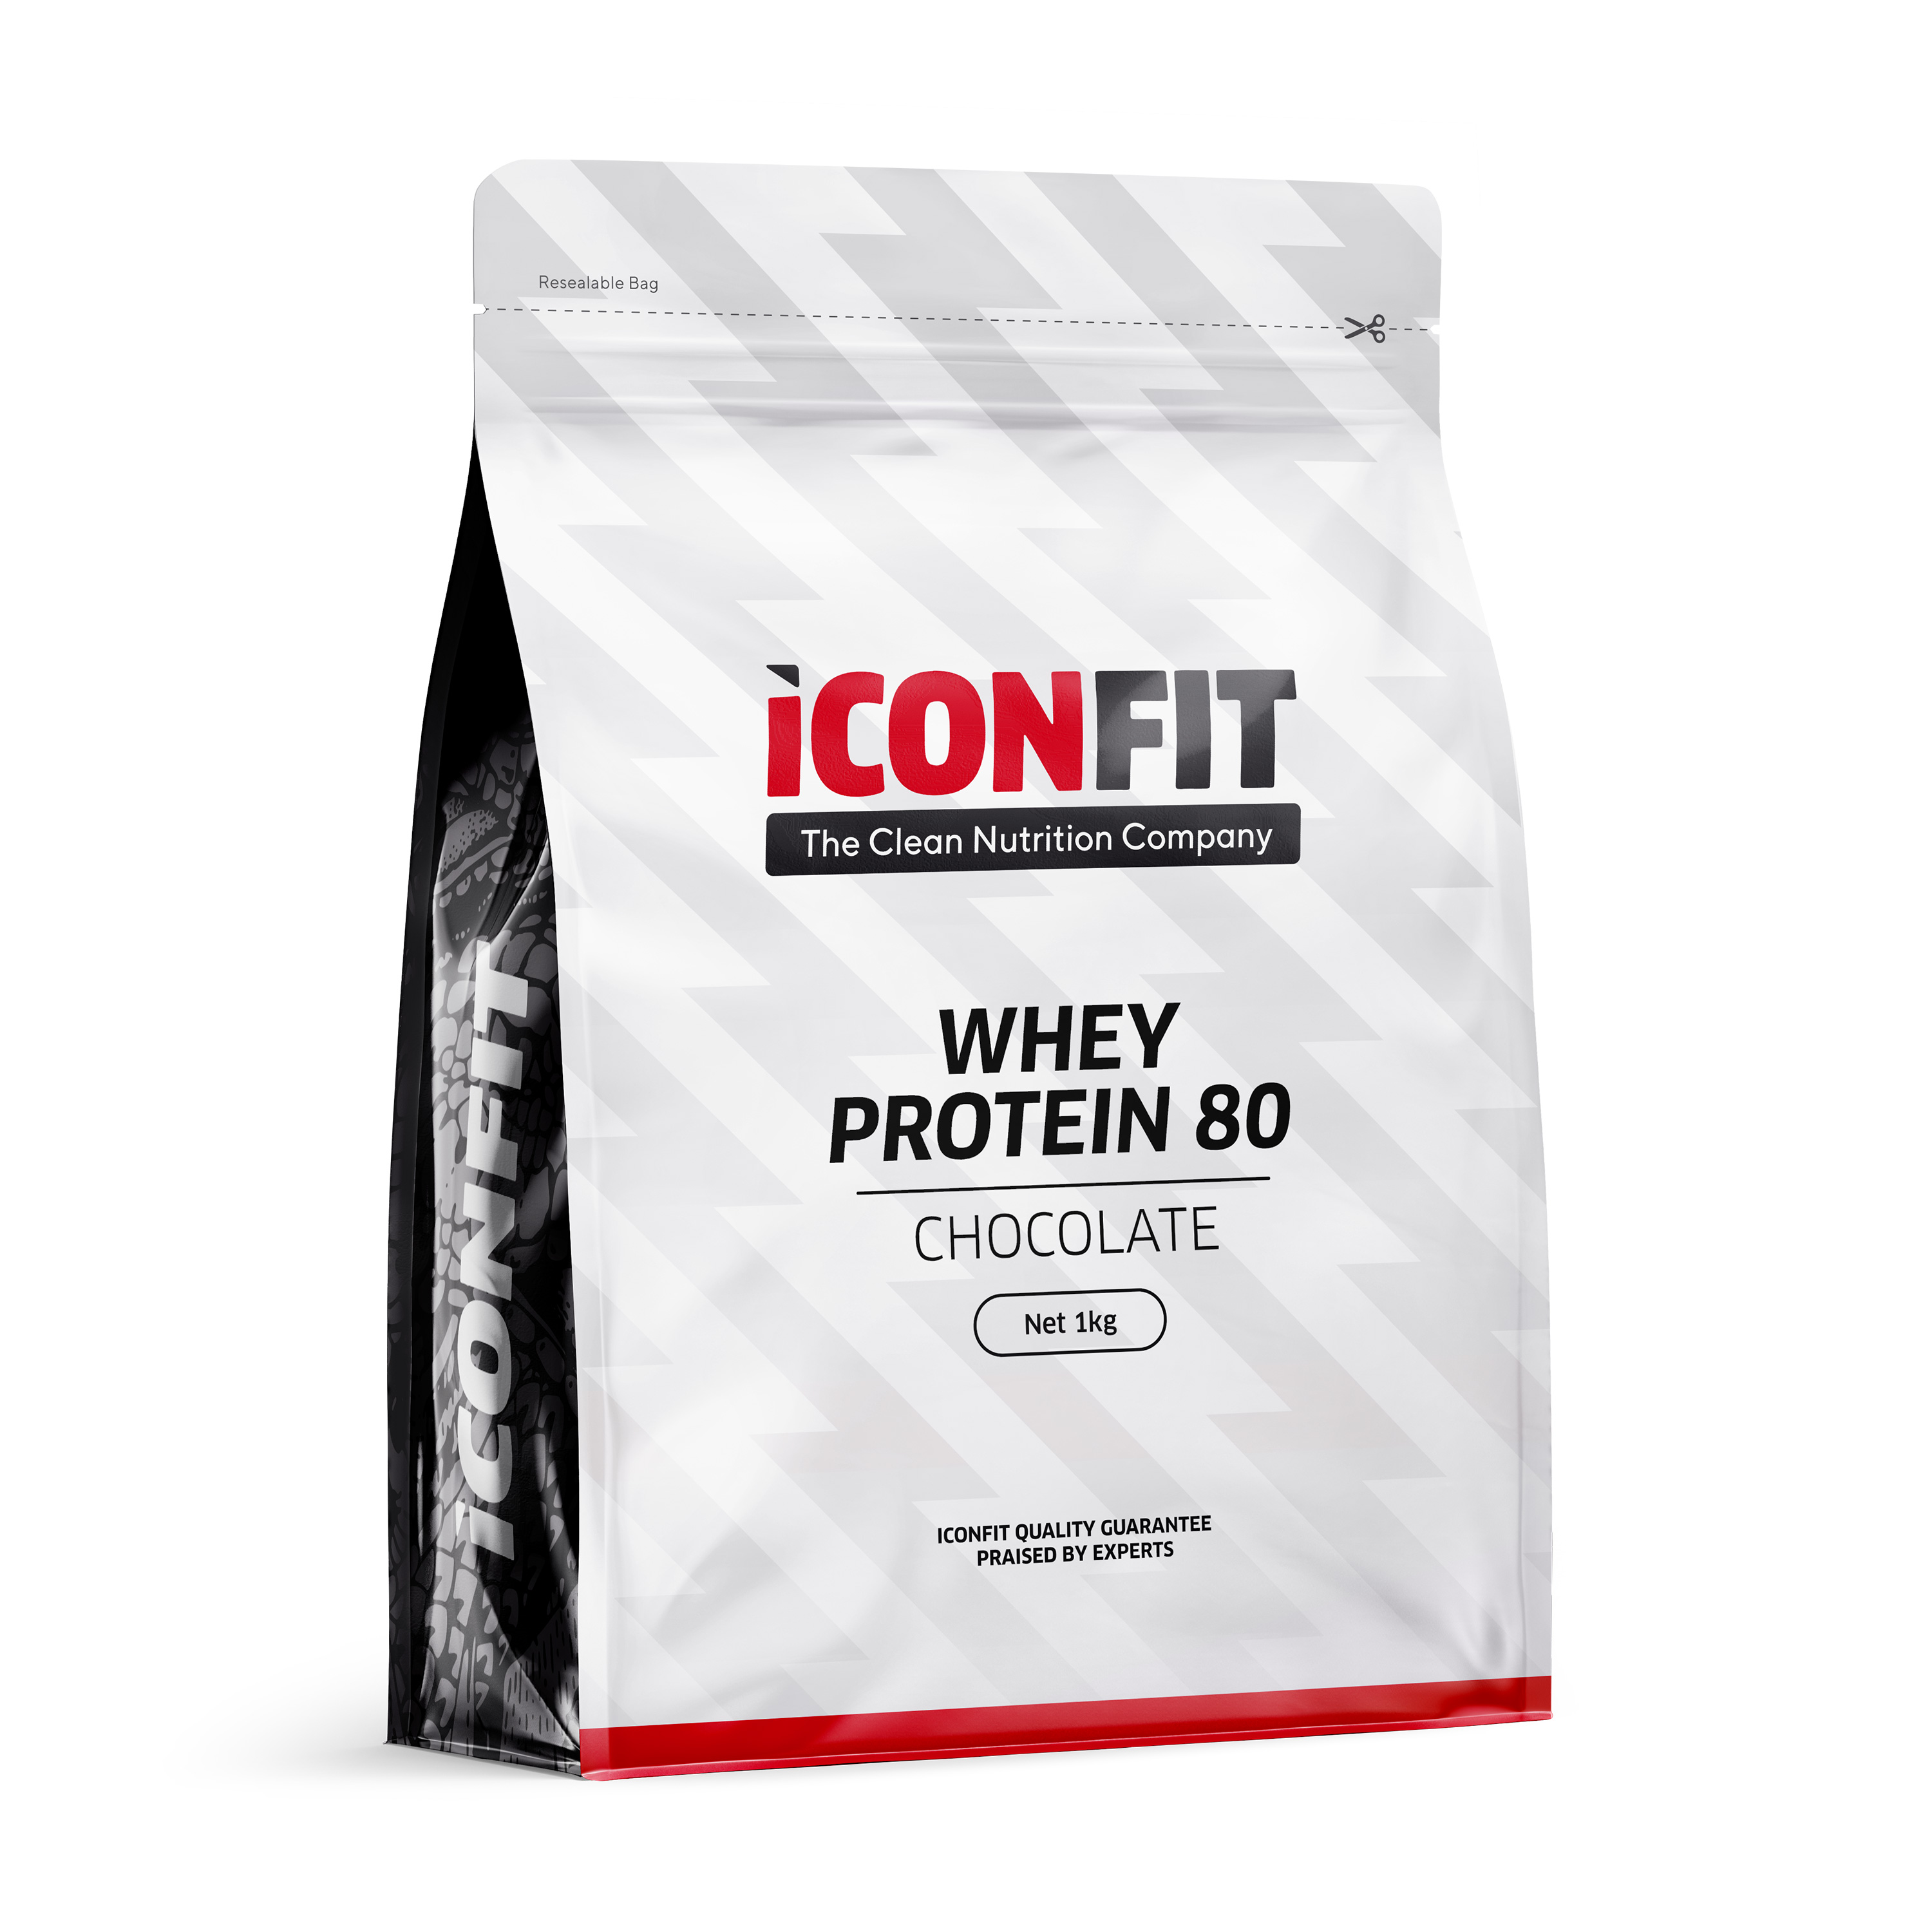 ICONFIT-Whey-Protein-80-Chocolate-1000g